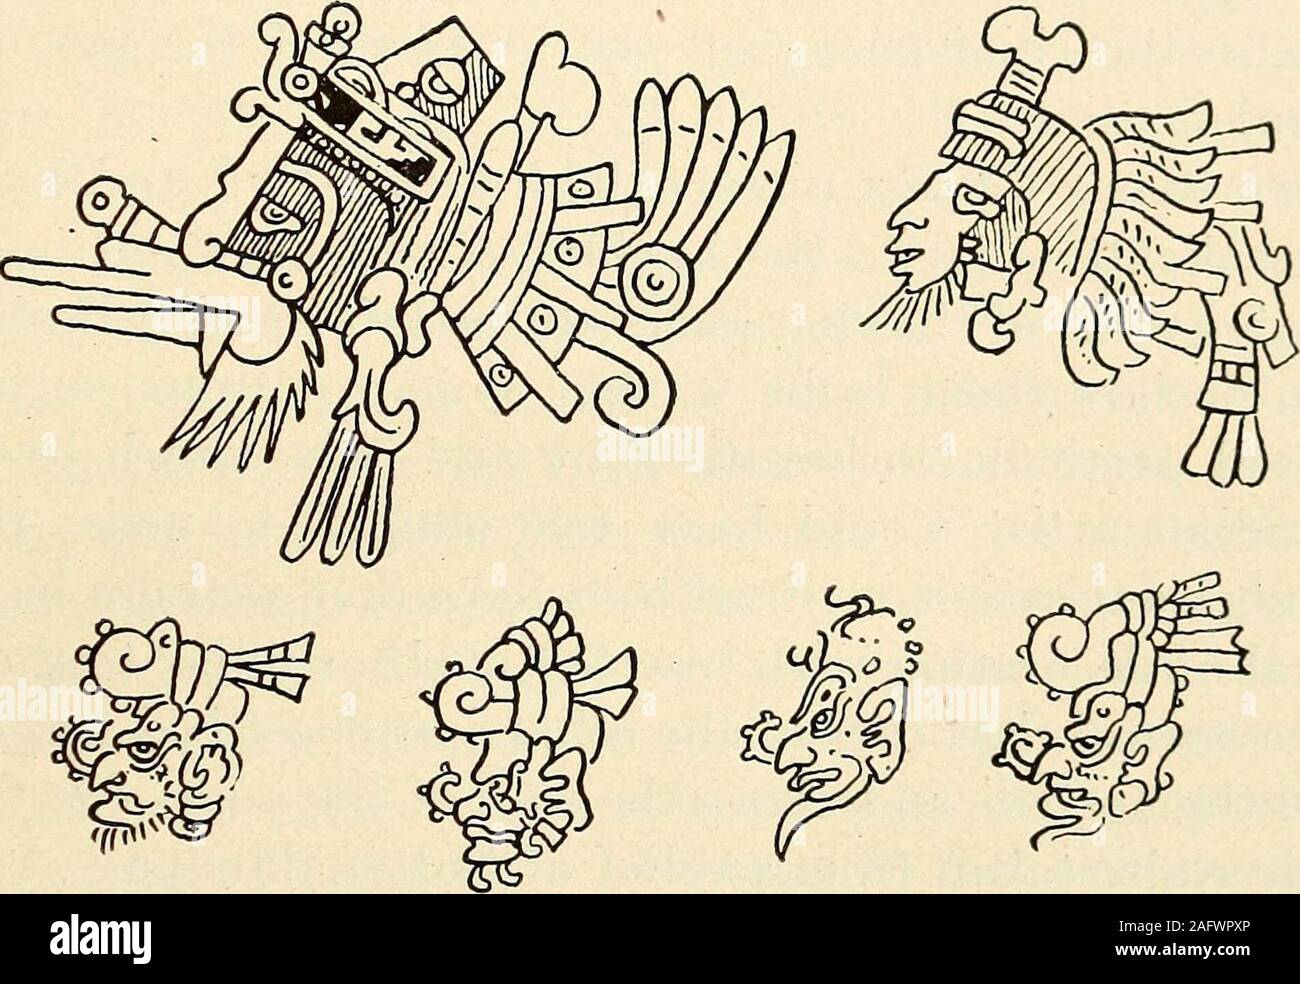 . Mexican and Central American antiquities, calendar systems, and history;. b No criavan barbas, y decian que les quemavan los rostros sus madres eon pafioscalientes, siendo ninos, porque no les creciesen (Landa). SKLKR] THE VASE OF CHAMA 659 The sun god is represented in Maya manuscripts as bearded, and so,frequently, in Mexican picture writings, is the god Quetzalcoatl, who.although usually called the wind god, can not deny kinship with thesun god of the Maya tribes. The Mayas styled the sunbeams u mex kin ( beard of the sun ).I give in a. figure 134, two pictures of Quetzalcoatl, and below Stock Photo